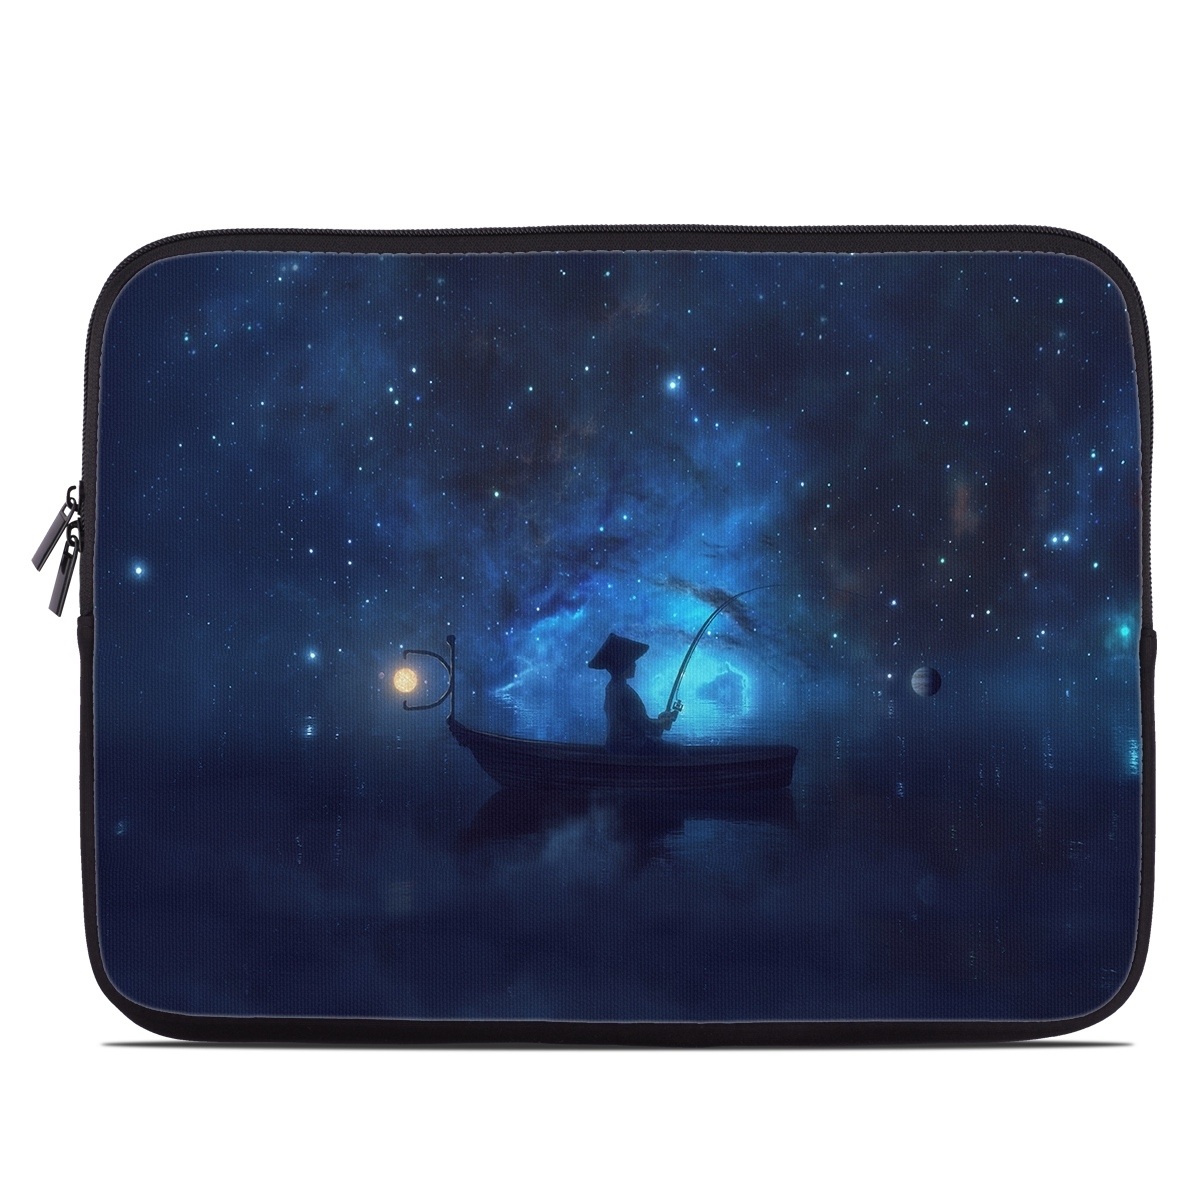 Laptop Sleeve - Starlord (Image 1)